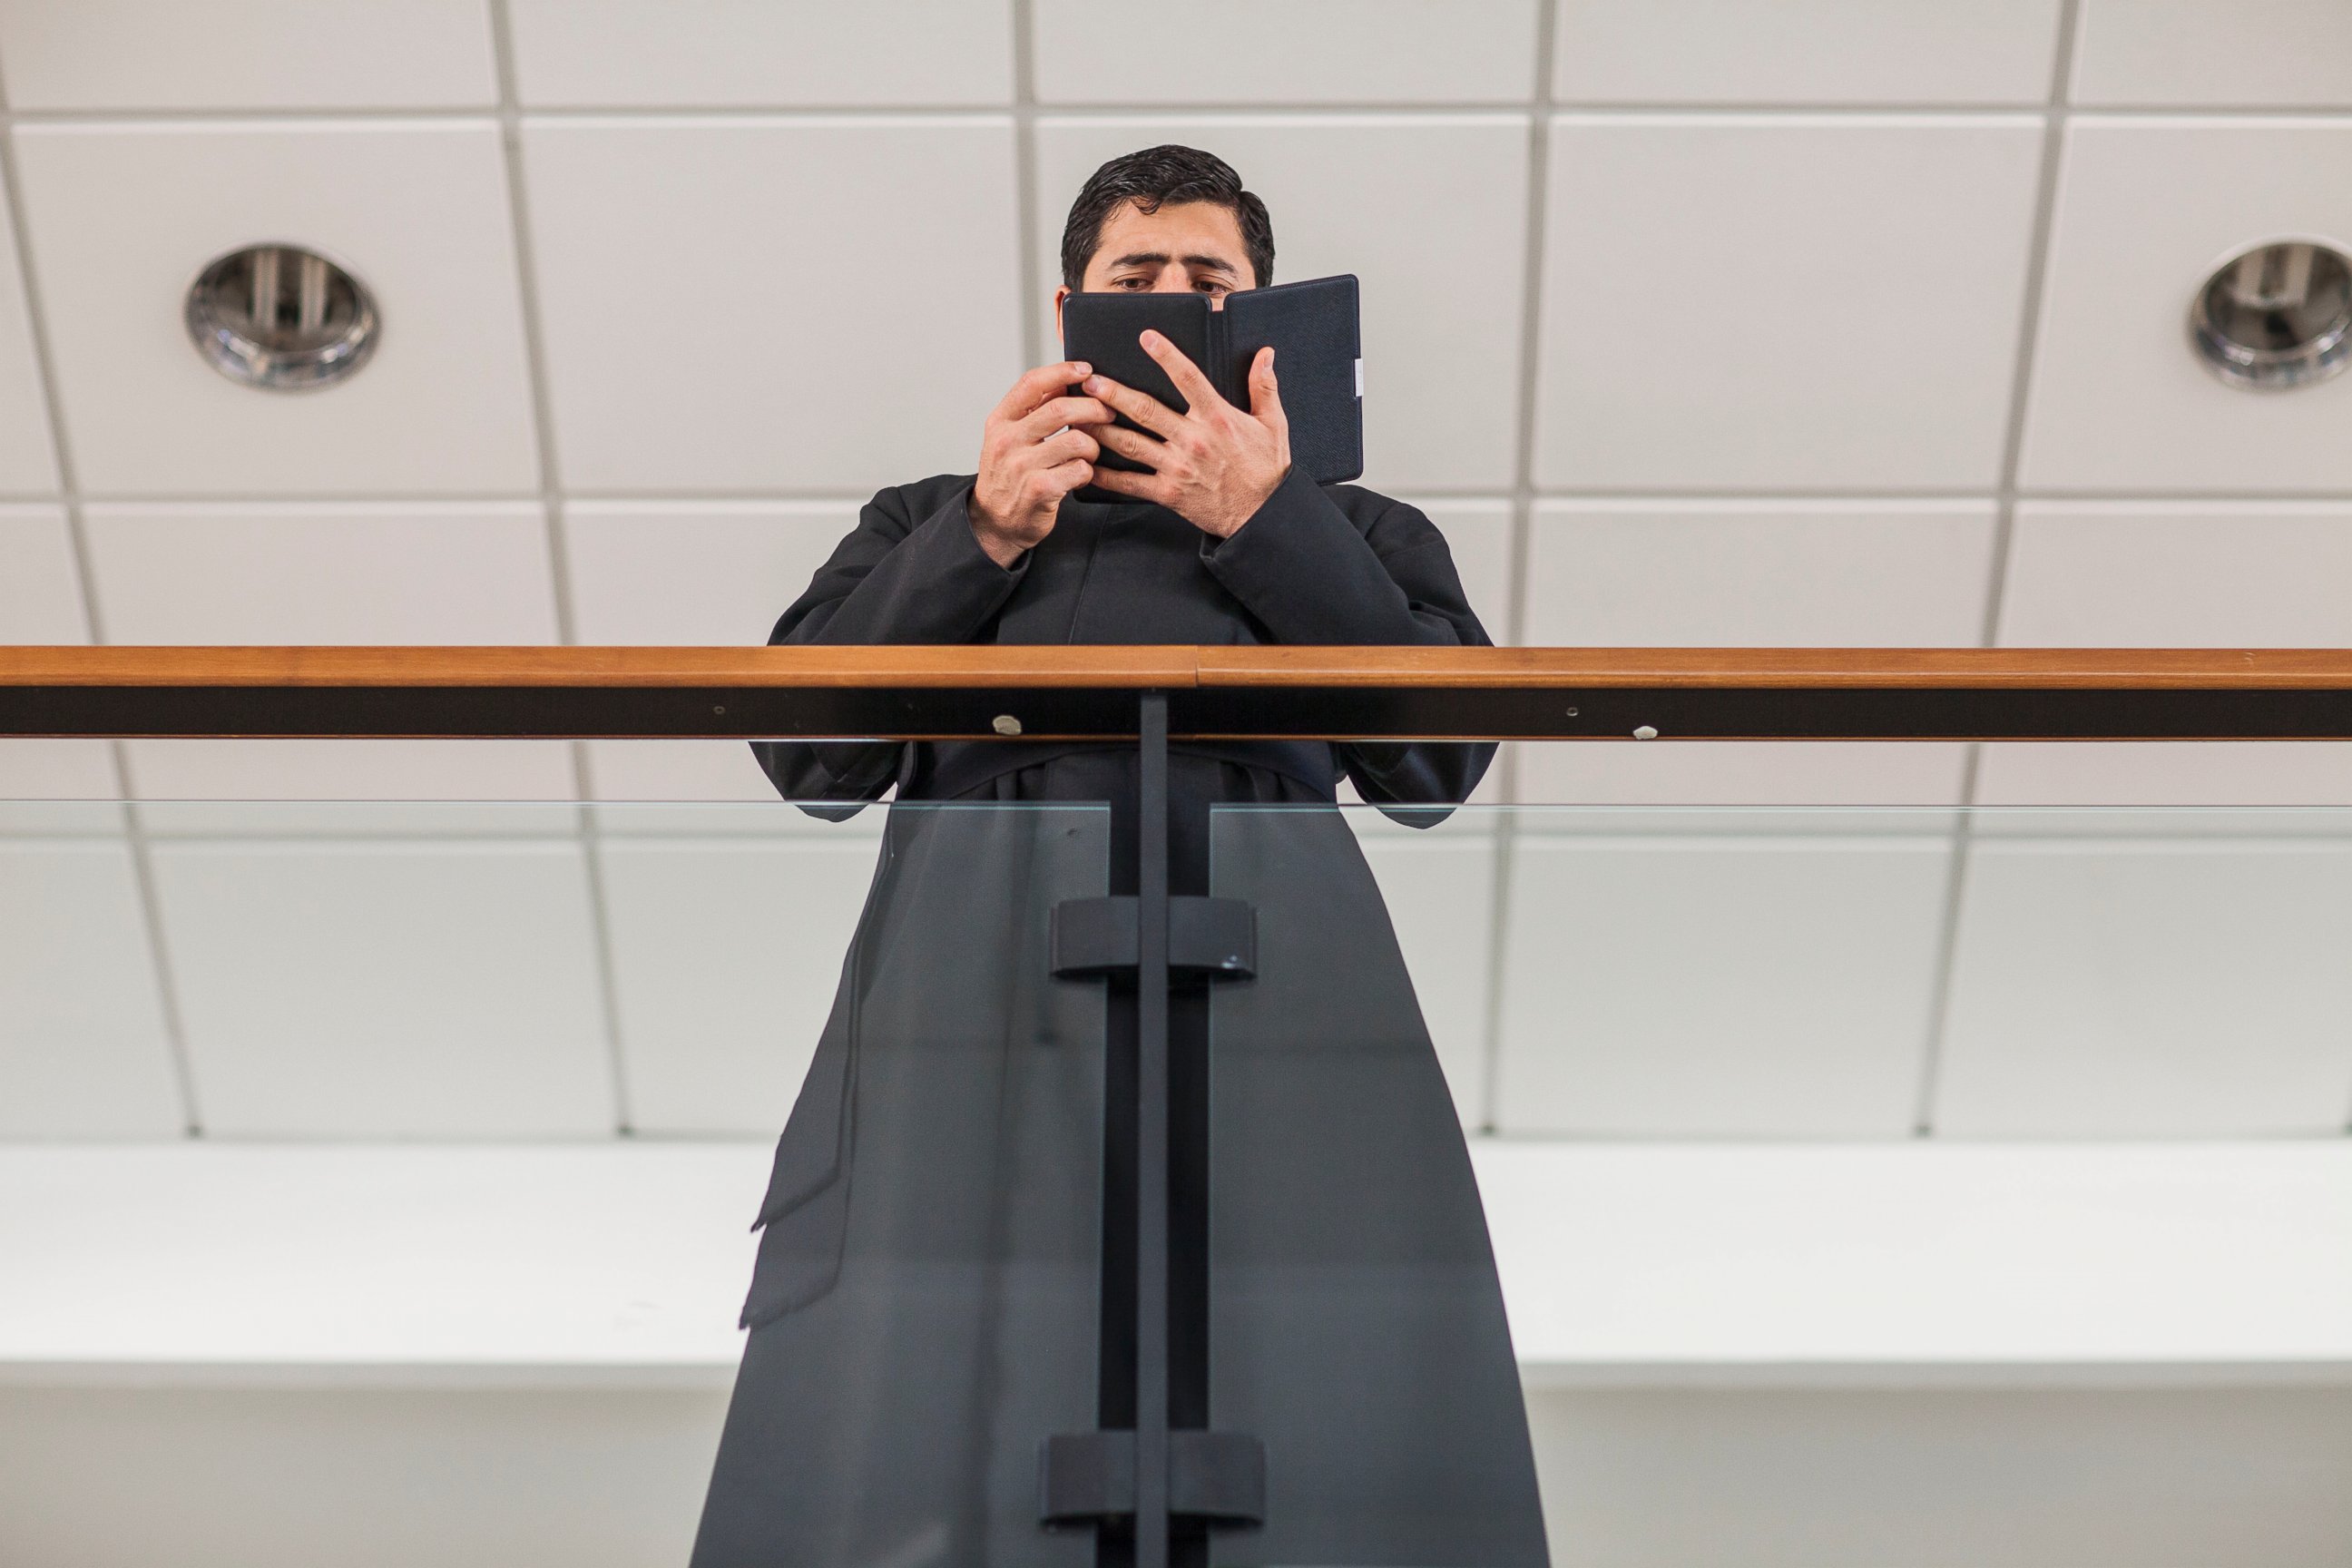 PHOTO: A priest who is a student of the Pontifical Athenaeum Regina Apostolorum reads the Bible during class break while the Exorcism and Prayer of Liberation annual conference is taking place on May 5, 2014 in Rome. Italy